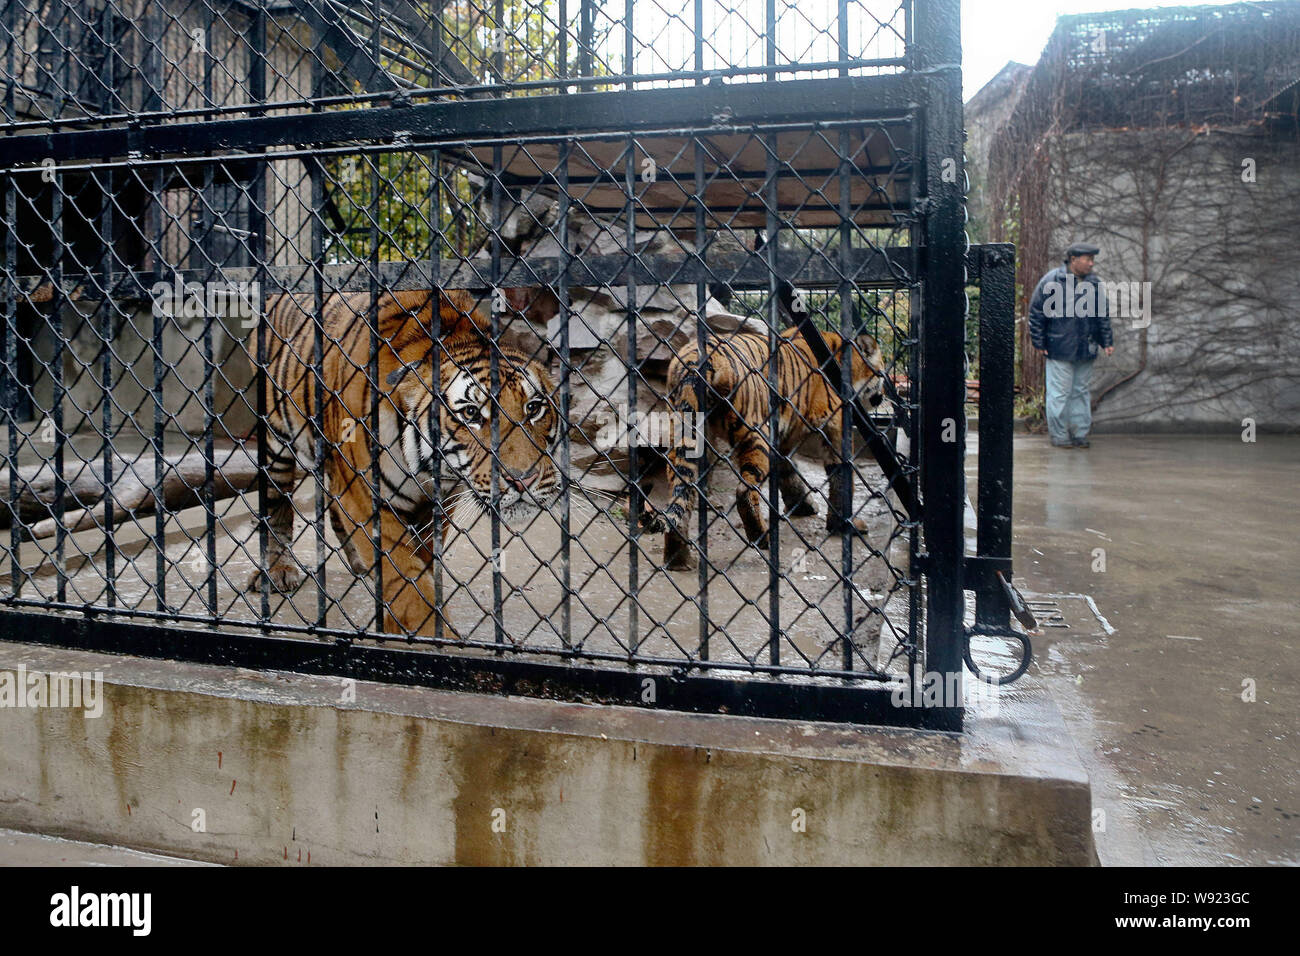 South China tigers are caged inside their enclosure at the breeding center of the Shanghai Zoo in Shanghai, China, 17 December 2013.   A keeper at the Stock Photo